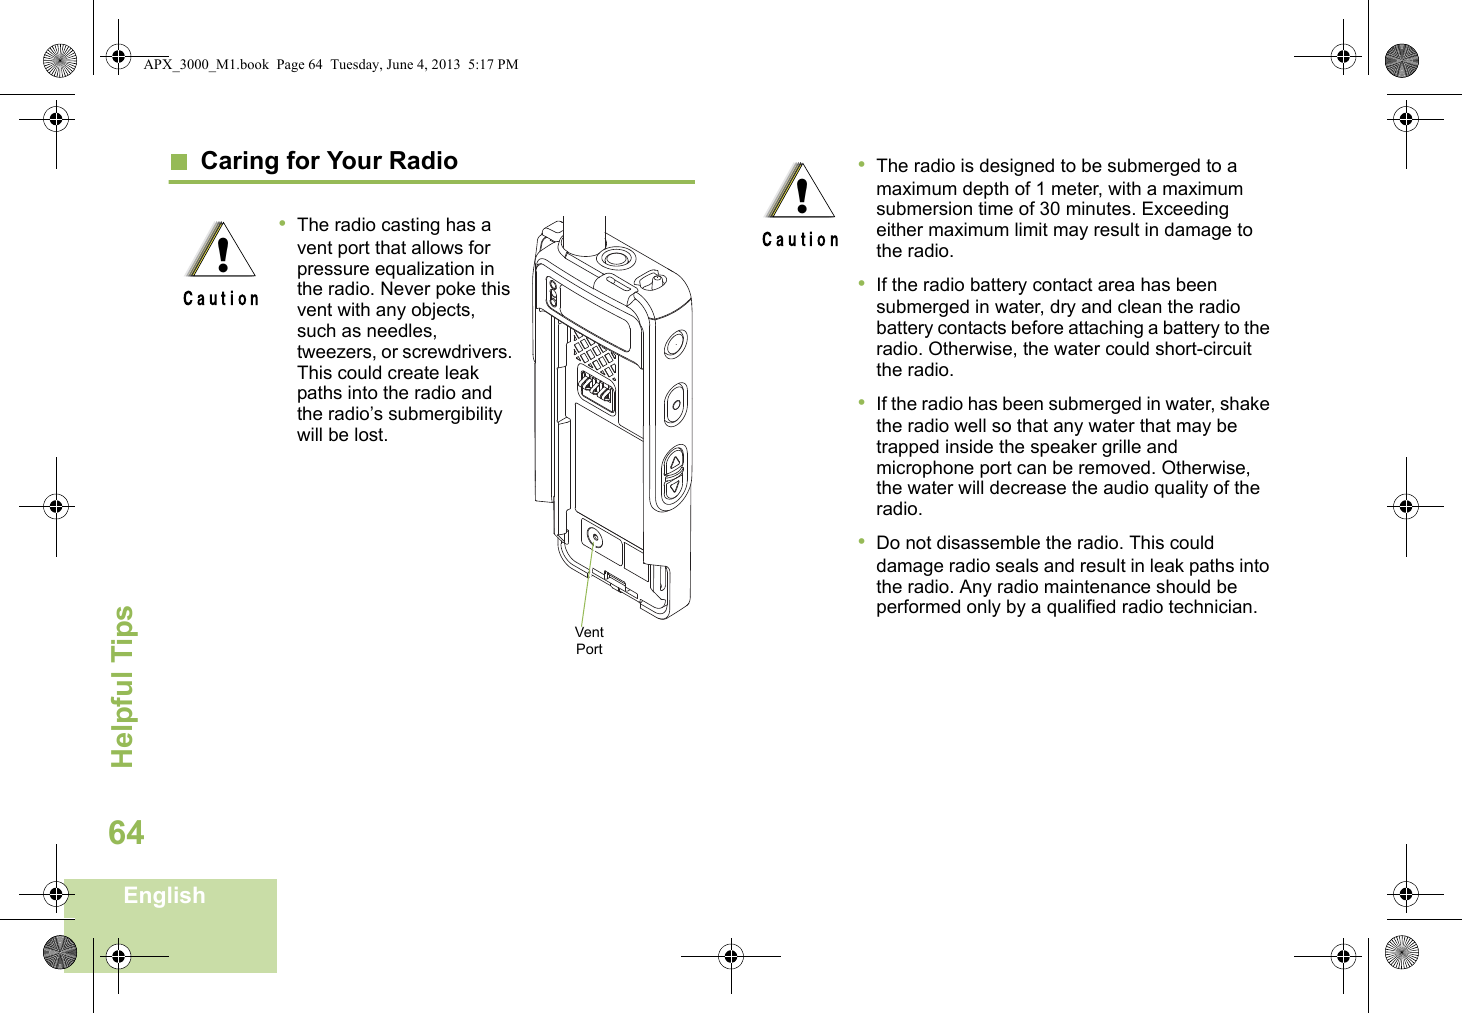 Helpful TipsEnglish64  Caring for Your Radio•The radio casting has a vent port that allows for pressure equalization in the radio. Never poke this vent with any objects, such as needles, tweezers, or screwdrivers. This could create leak paths into the radio and the radio’s submergibility will be lost. !Vent Port•The radio is designed to be submerged to a maximum depth of 1 meter, with a maximum submersion time of 30 minutes. Exceeding either maximum limit may result in damage to the radio.•If the radio battery contact area has been submerged in water, dry and clean the radio battery contacts before attaching a battery to the radio. Otherwise, the water could short-circuit the radio.•If the radio has been submerged in water, shake the radio well so that any water that may be trapped inside the speaker grille and microphone port can be removed. Otherwise, the water will decrease the audio quality of the radio.•Do not disassemble the radio. This could damage radio seals and result in leak paths into the radio. Any radio maintenance should be performed only by a qualified radio technician.!APX_3000_M1.book  Page 64  Tuesday, June 4, 2013  5:17 PM